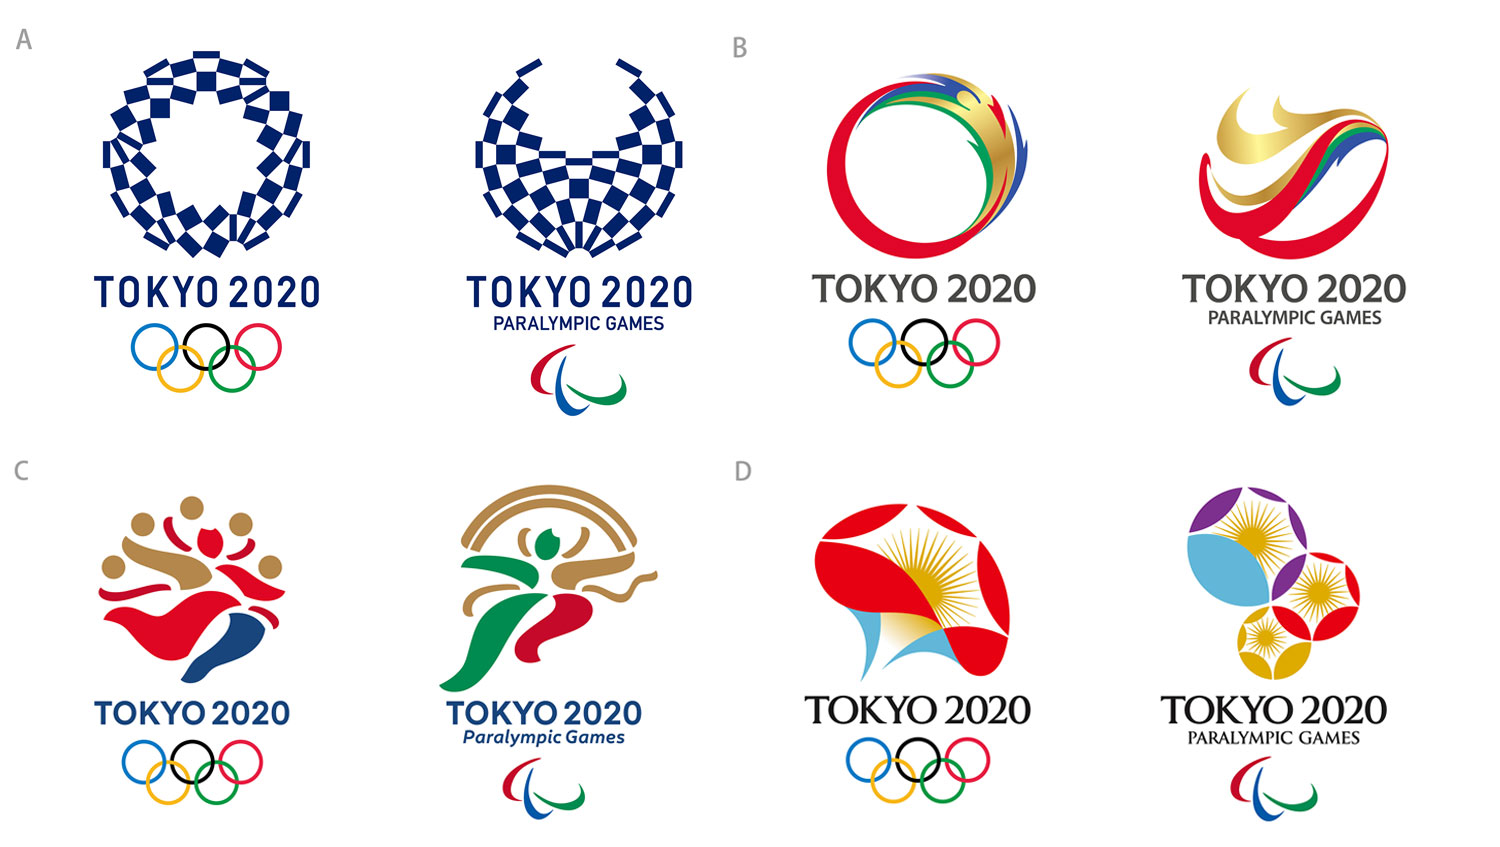 Tokyo Olympics Logo Tokyo 2020 Olympic Games Design on Behance The